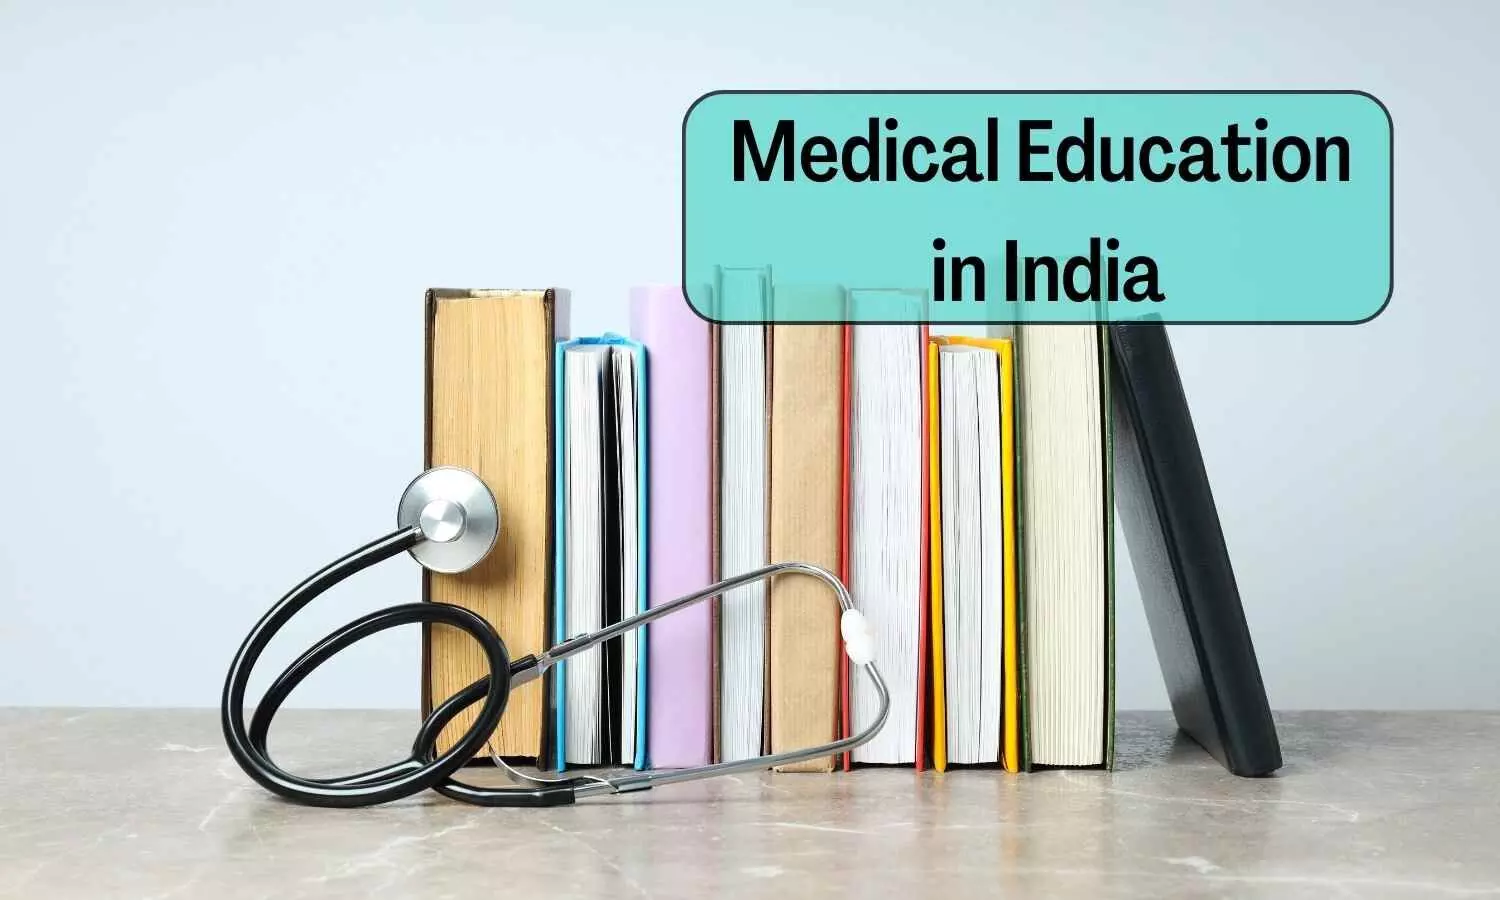 101,043 MBBS, 45,471 MD, MS, PG Diploma, 4,997 SS seats available across 660 medical colleges in India